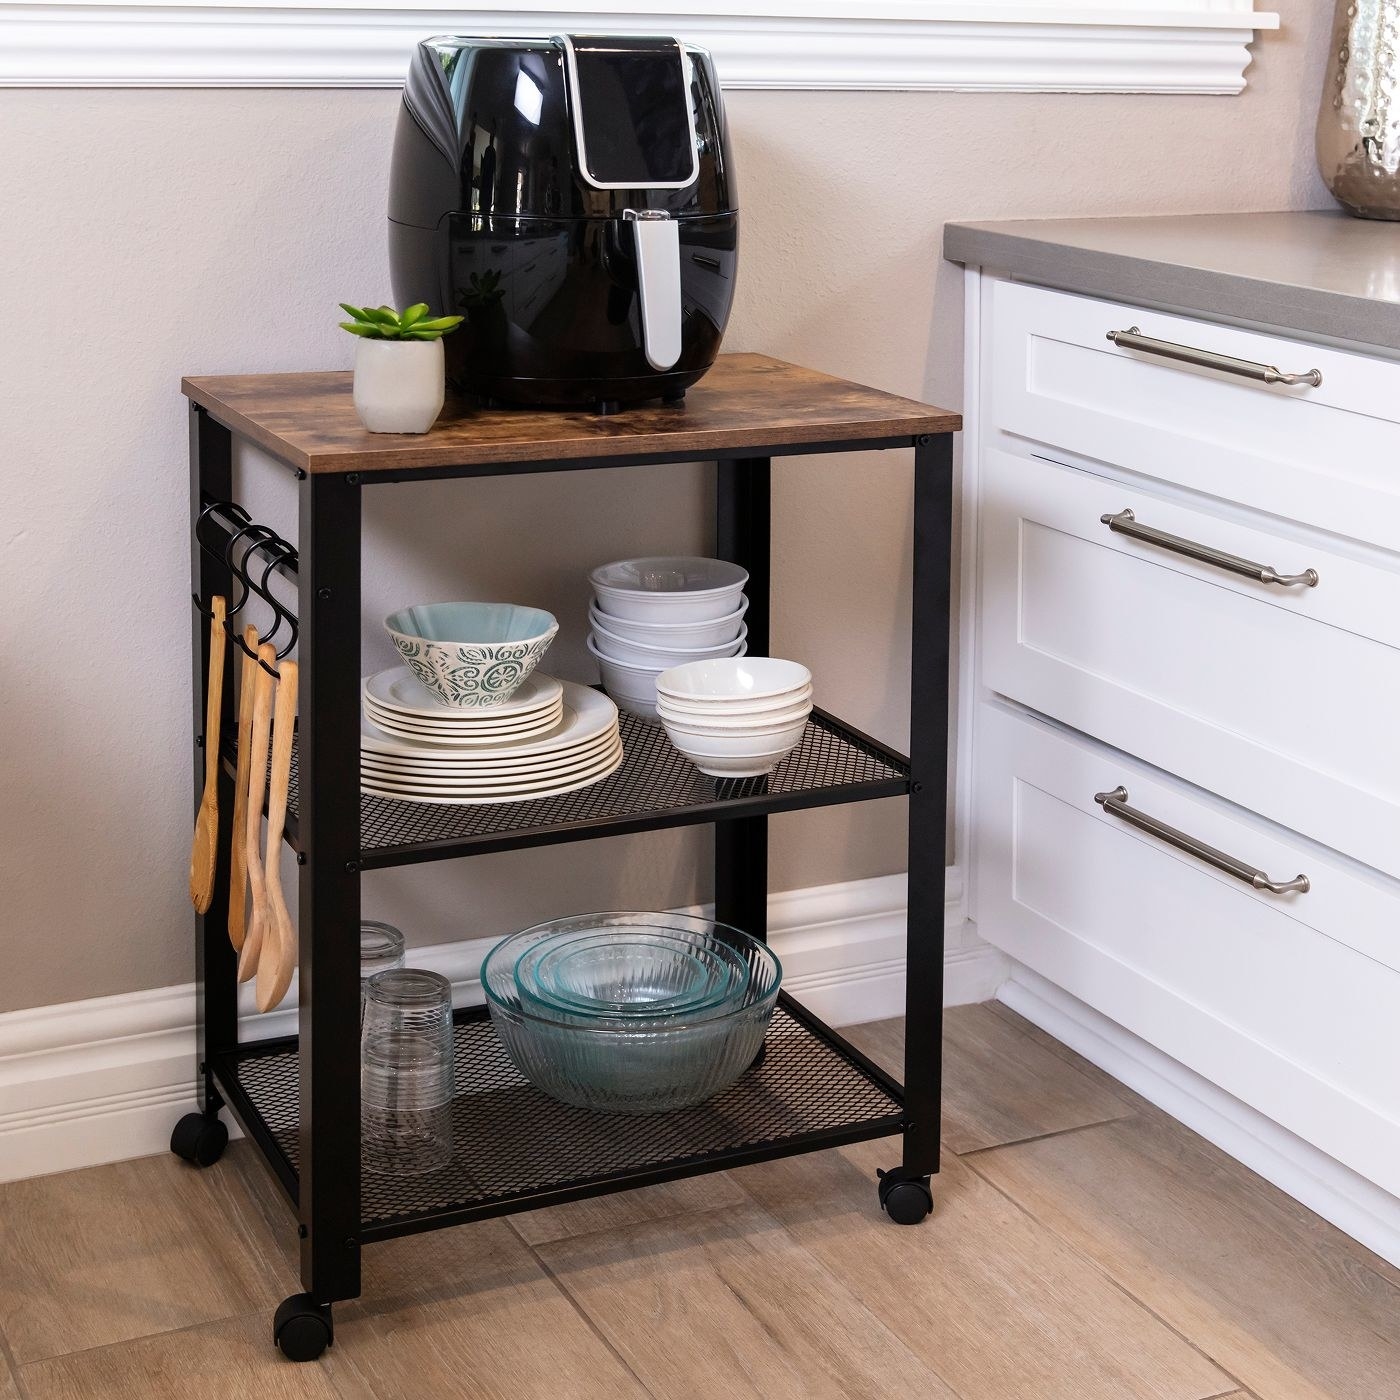 The three-tier rolling utility serving cart